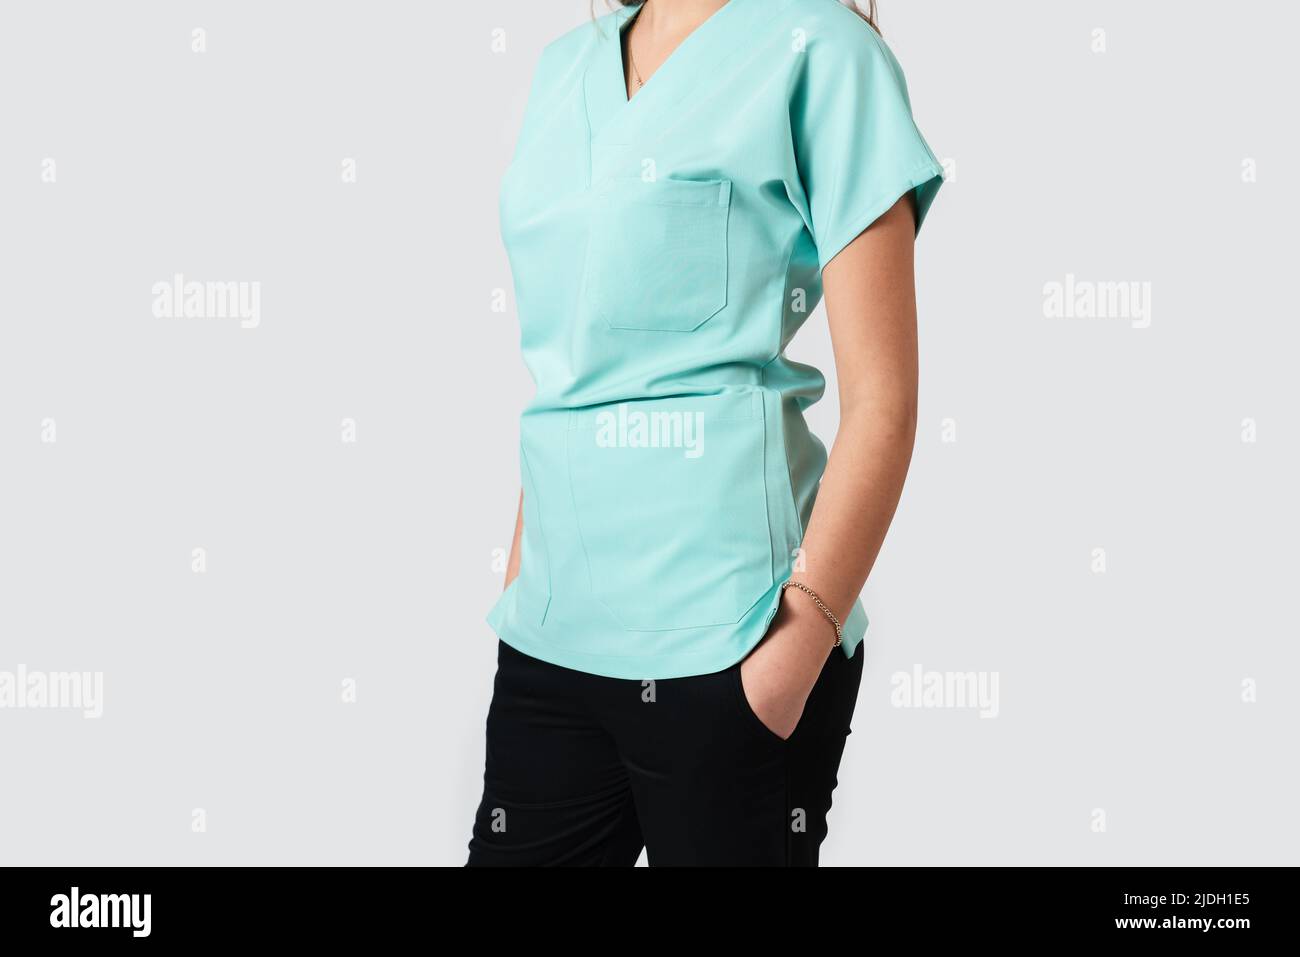 Portrait of a female doctor or nurse wearing turquoise medical uniform. High quality photo Stock Photo